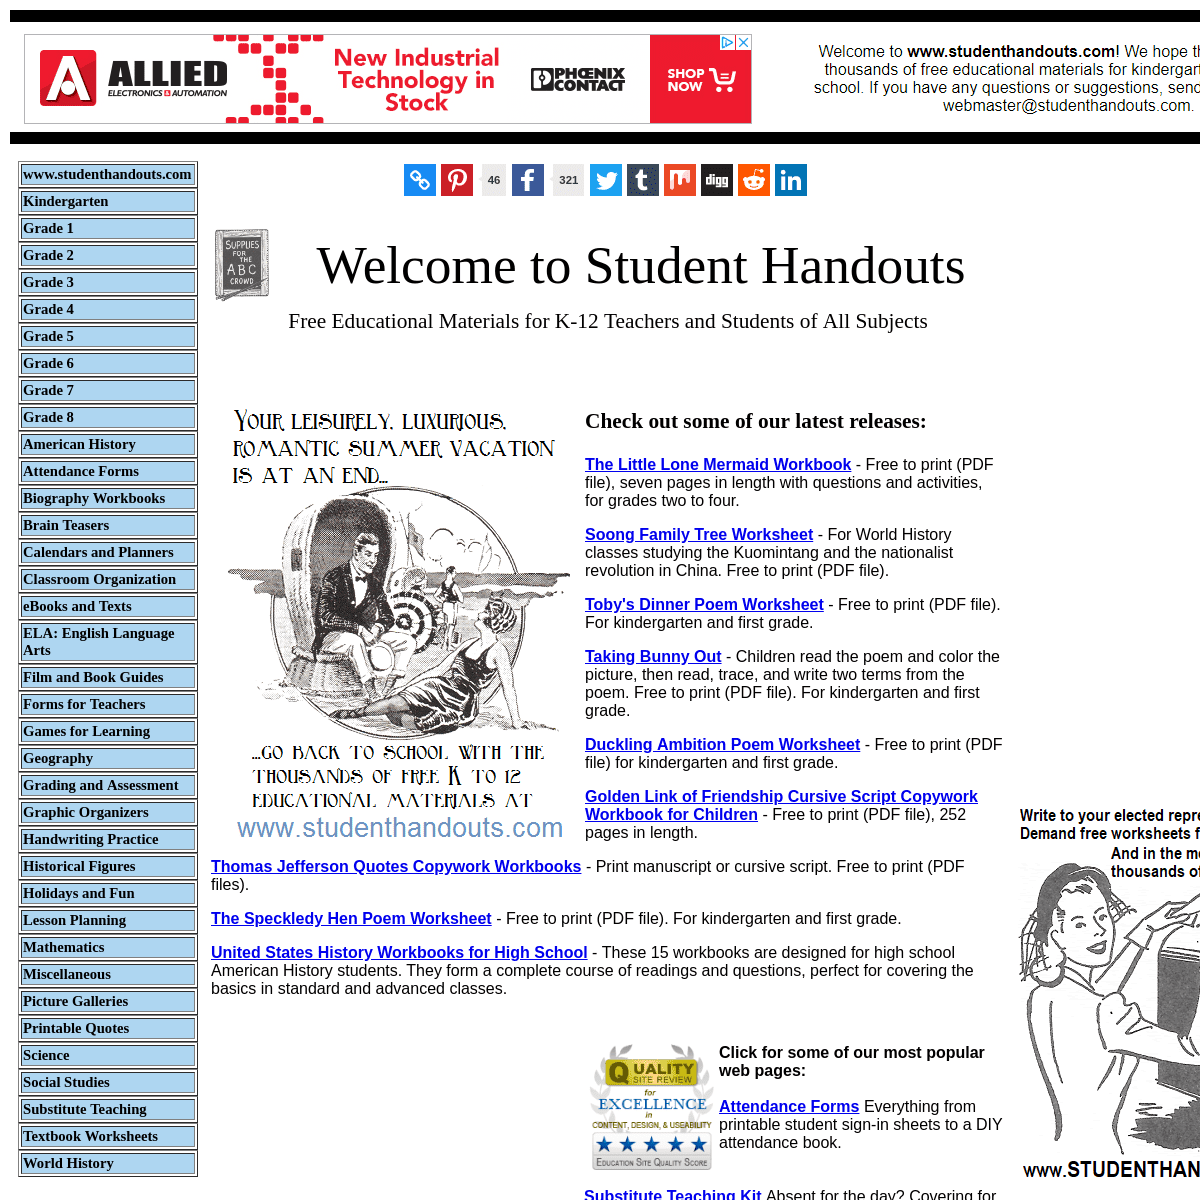 A complete backup of studenthandouts.com